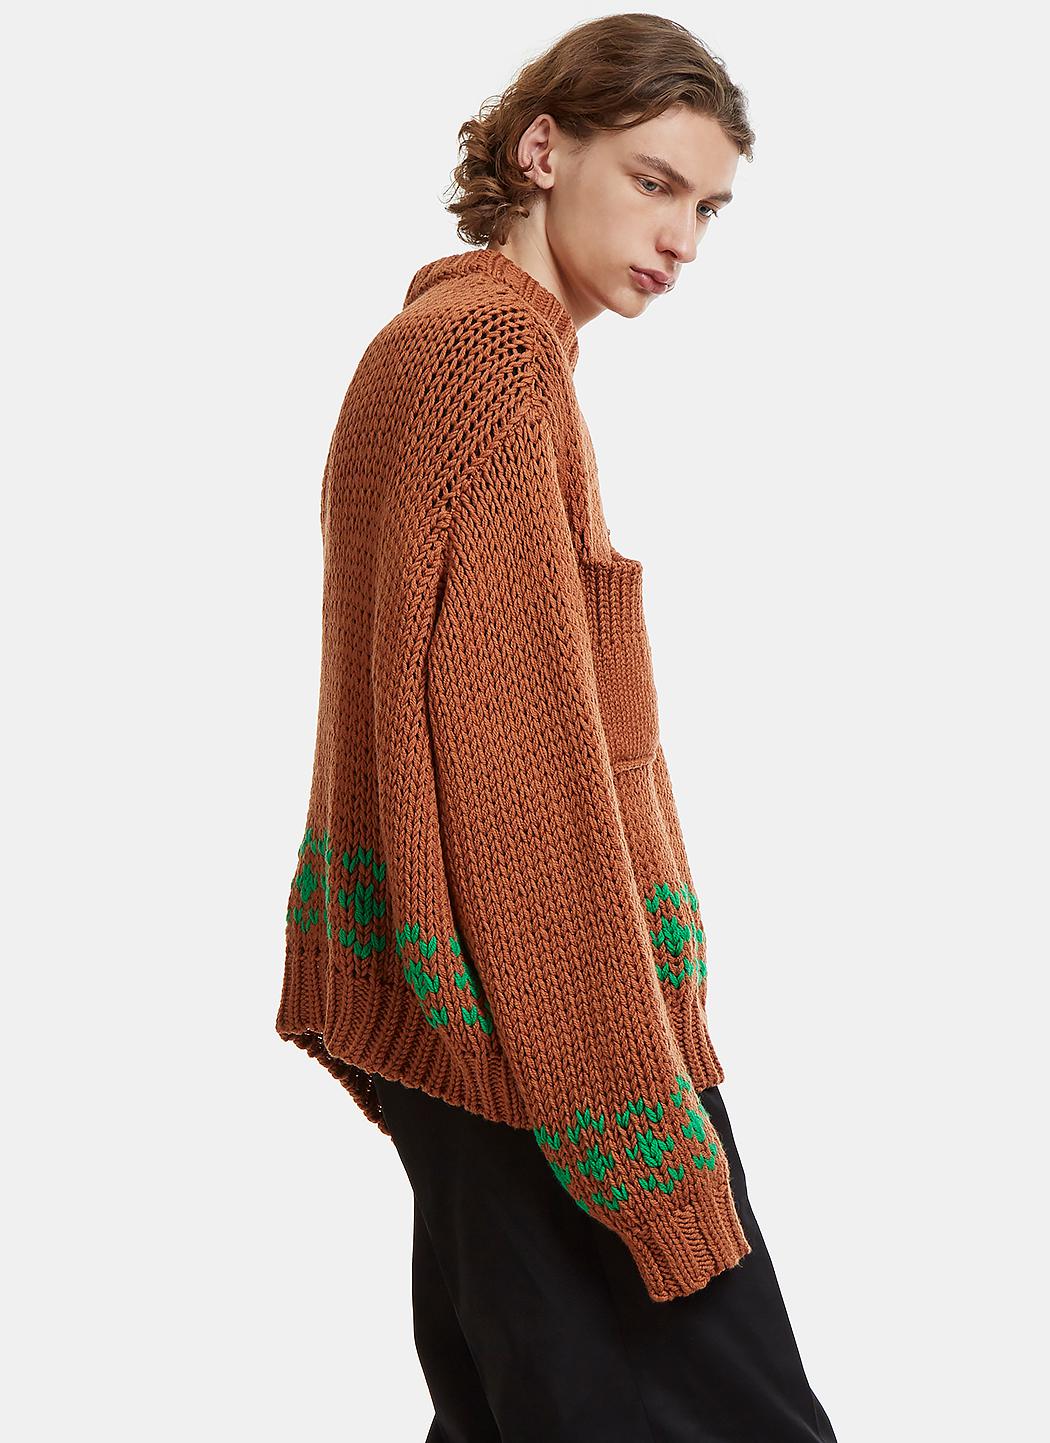 Raf Simons Wool Oversized Disturbed Knit Sweater In Brown for Men - Lyst